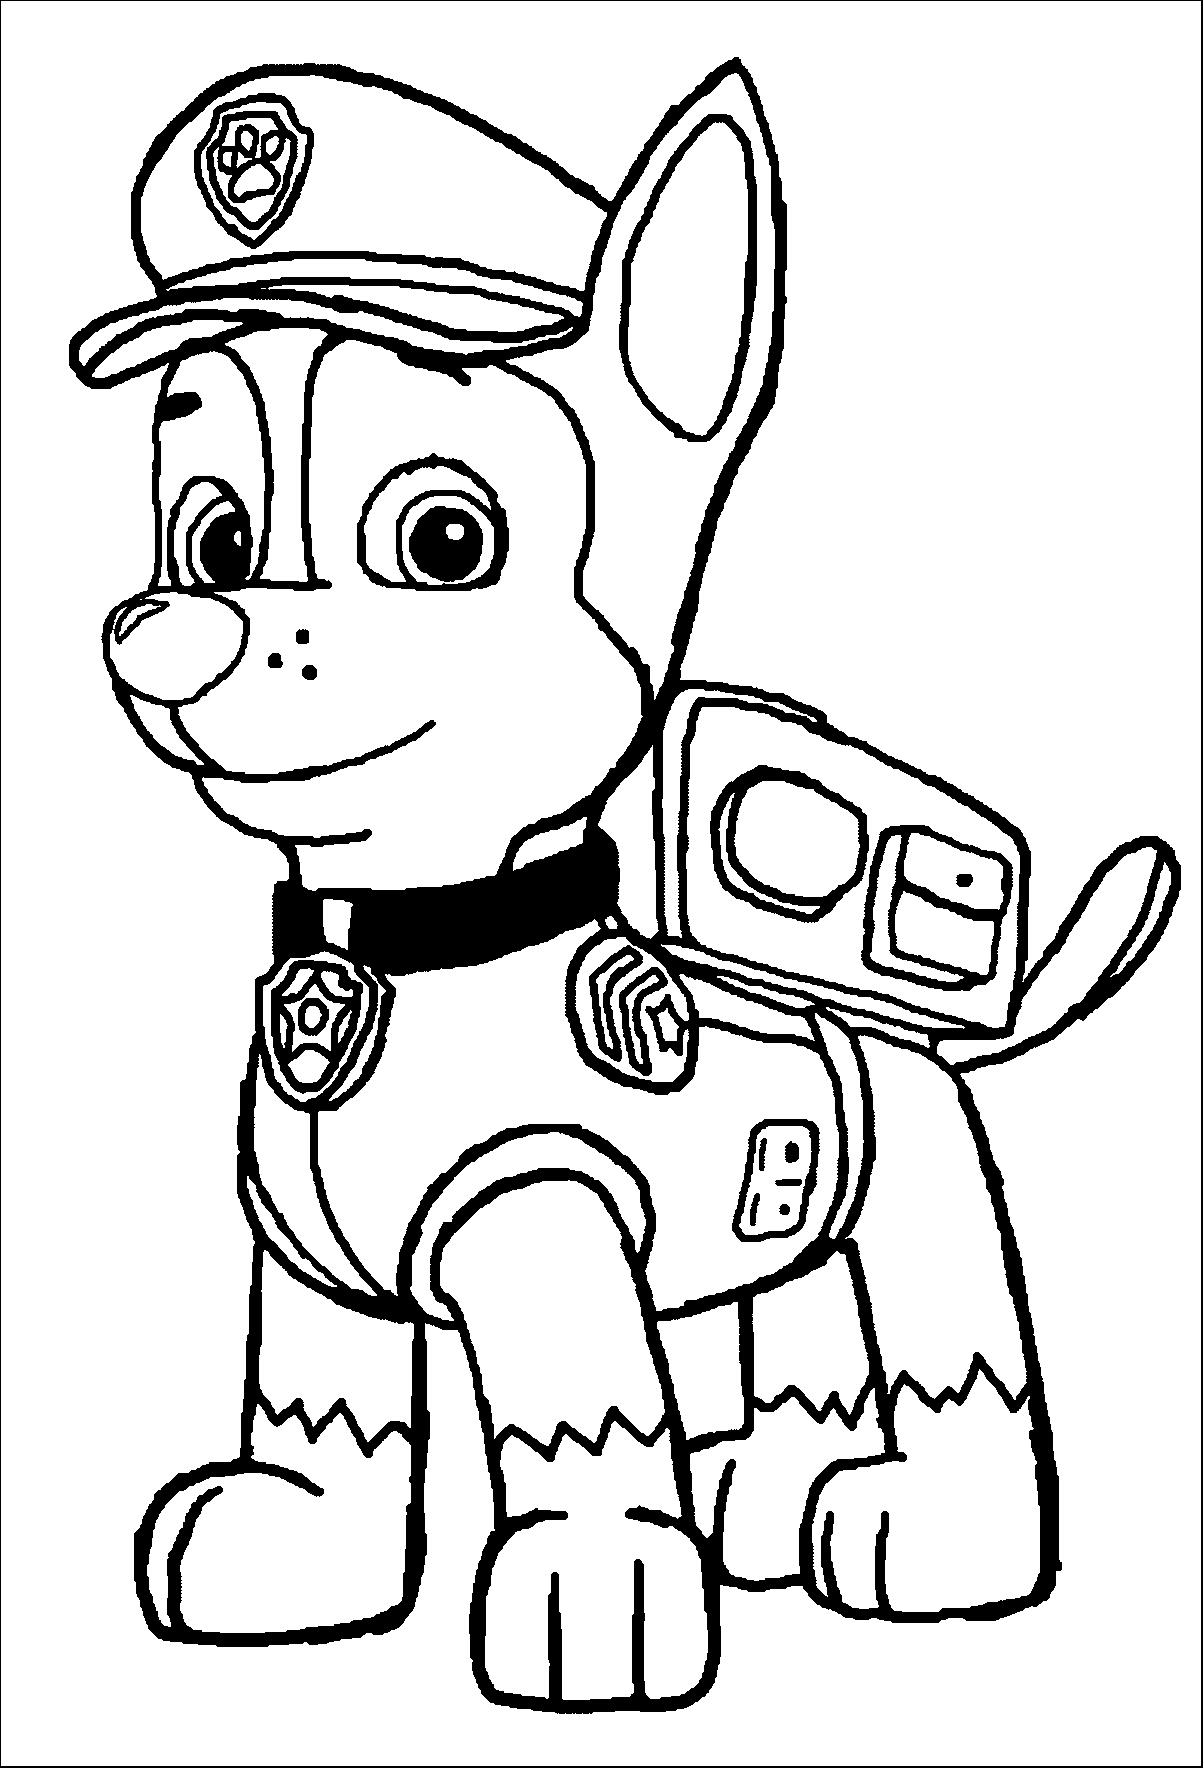 Download Paw Patrol Chase Coloring Page - Coloring Home